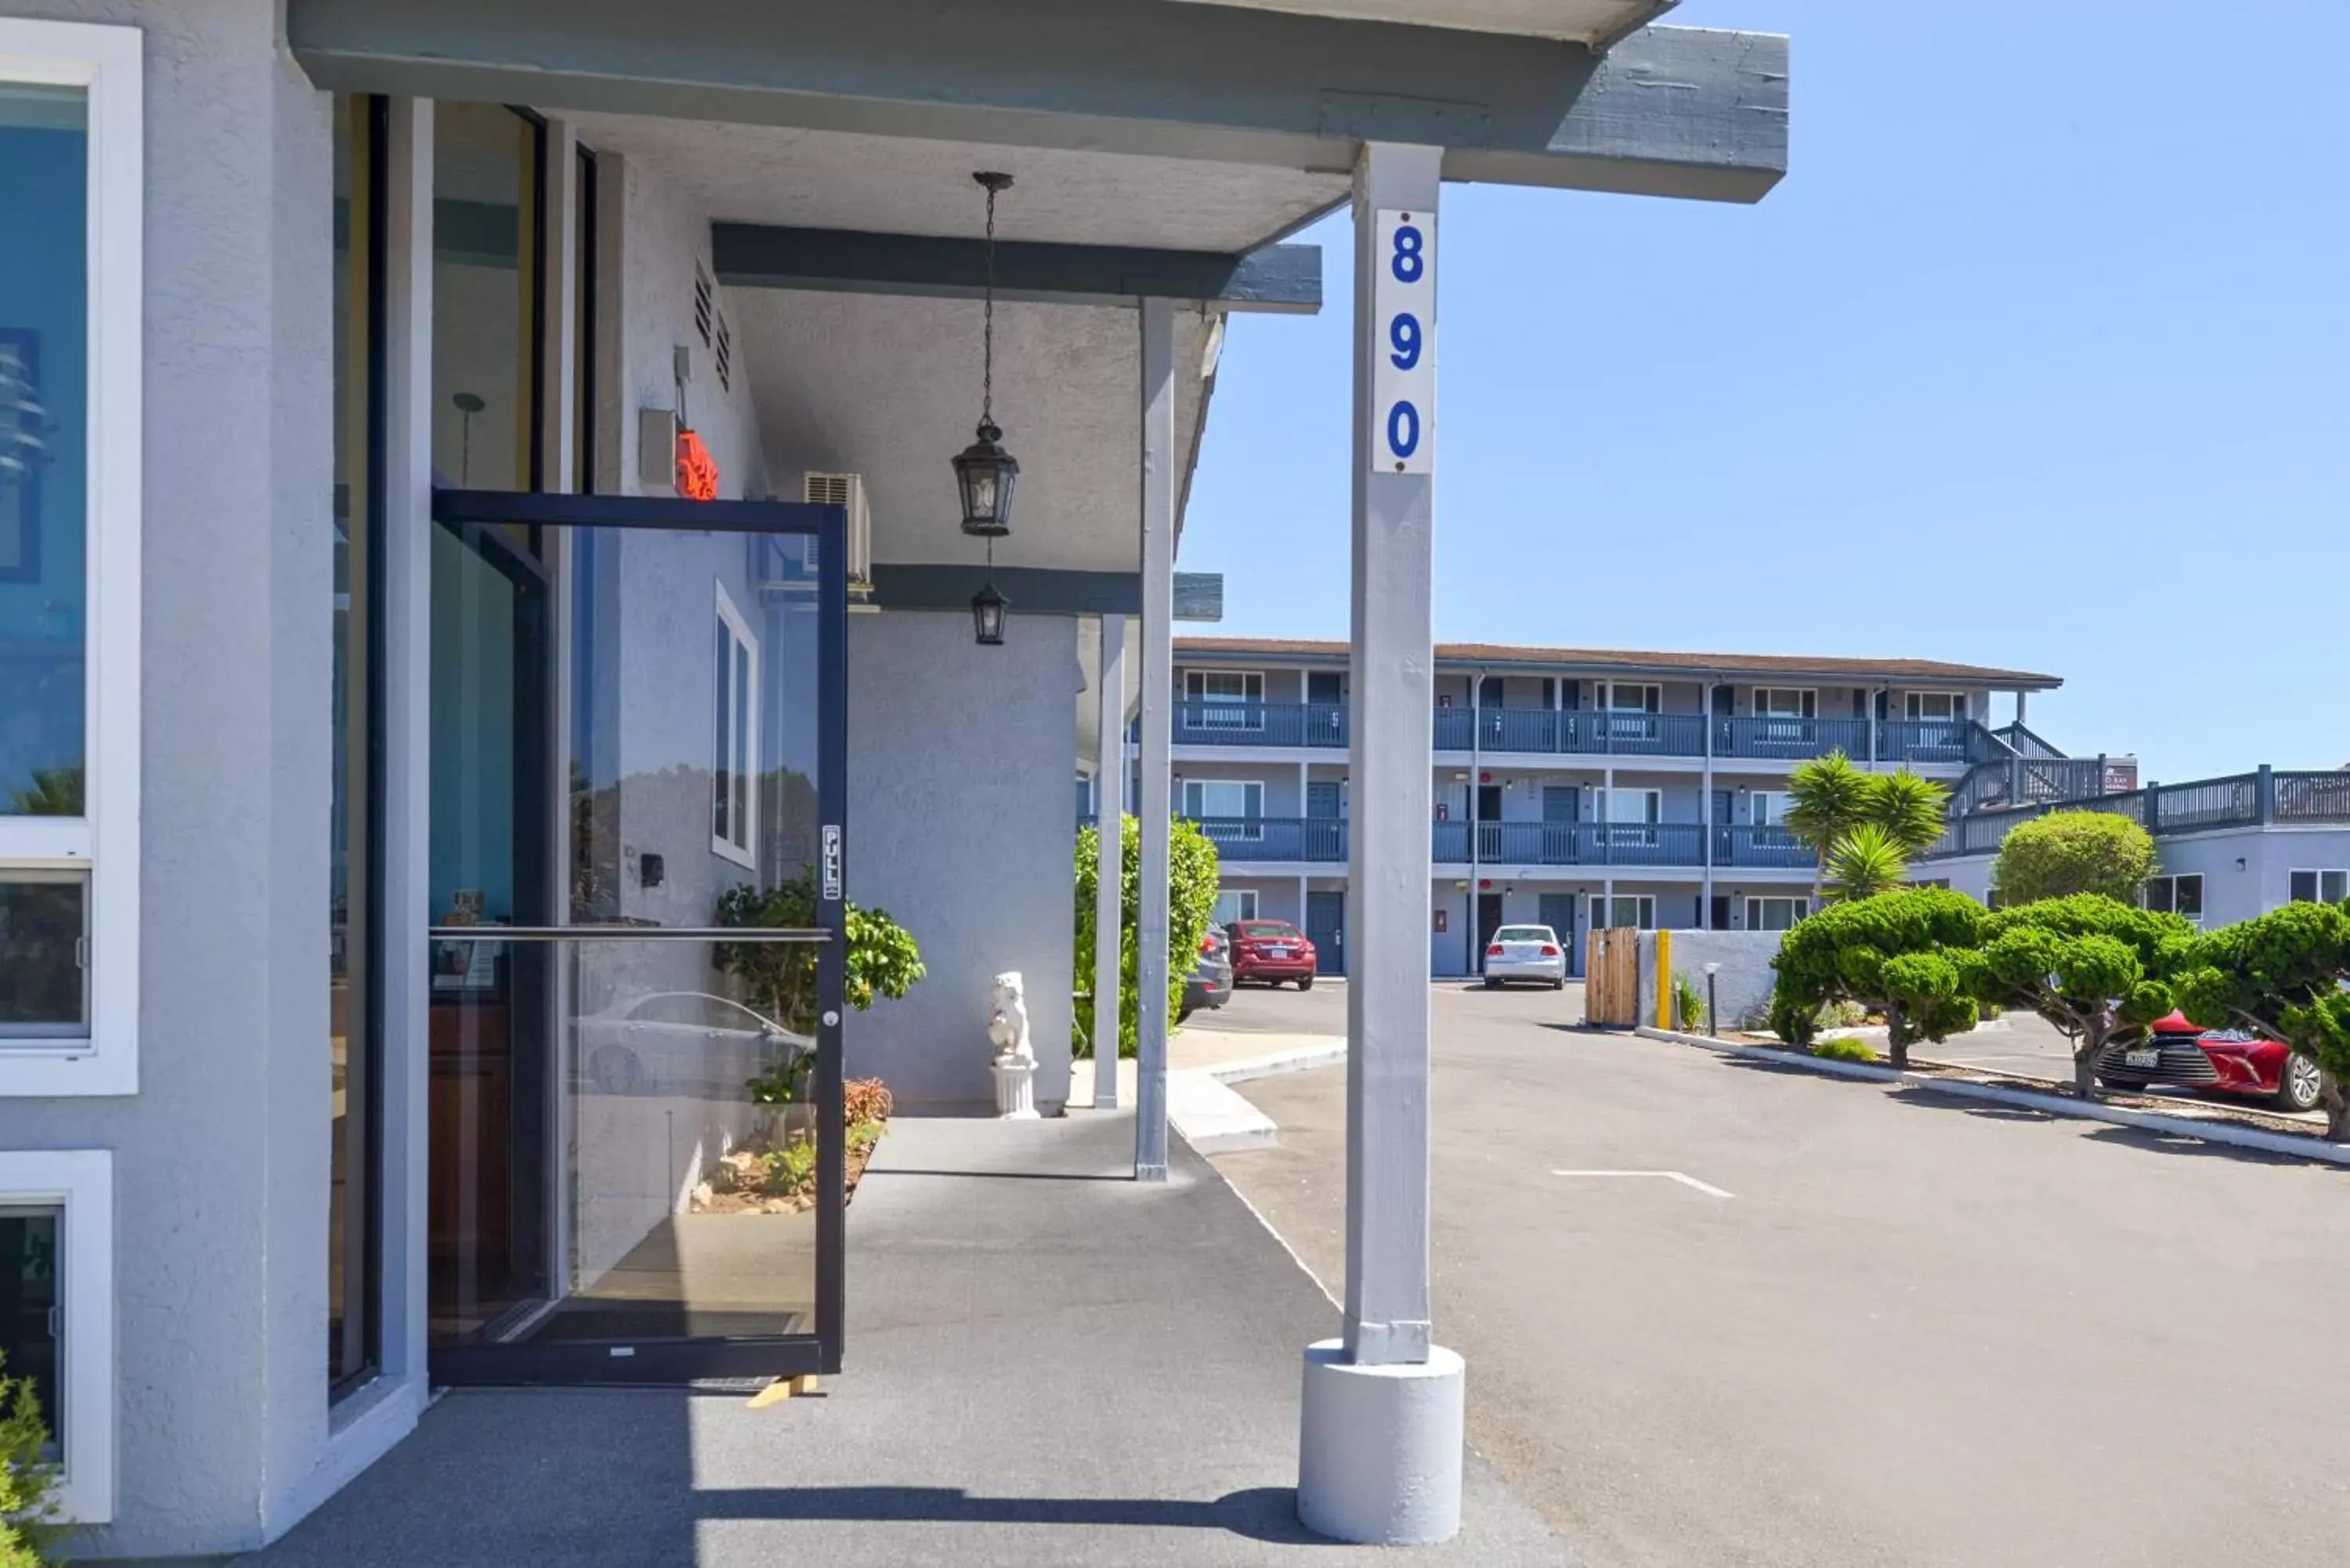 Property building in Pacific Shores Inn - Morro Bay